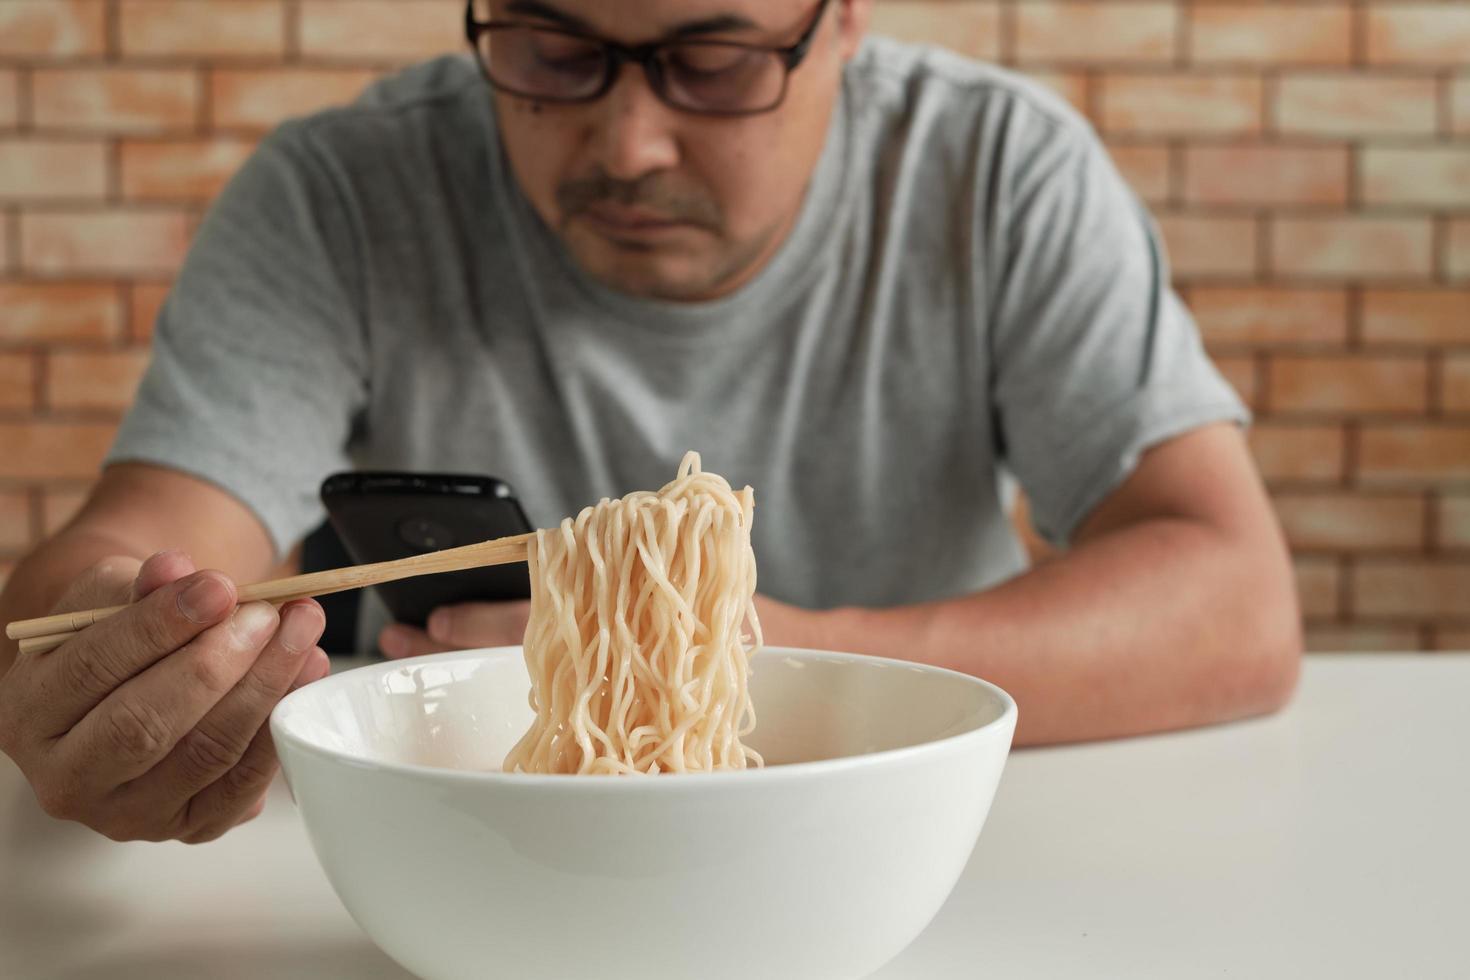 A casual Asian man on the brick wall background reading a mobile phone uses chopsticks to eat hot instant noodles meal in a white cup during lunchtime. Traditional Asian fast food cuisine lifestyle. photo